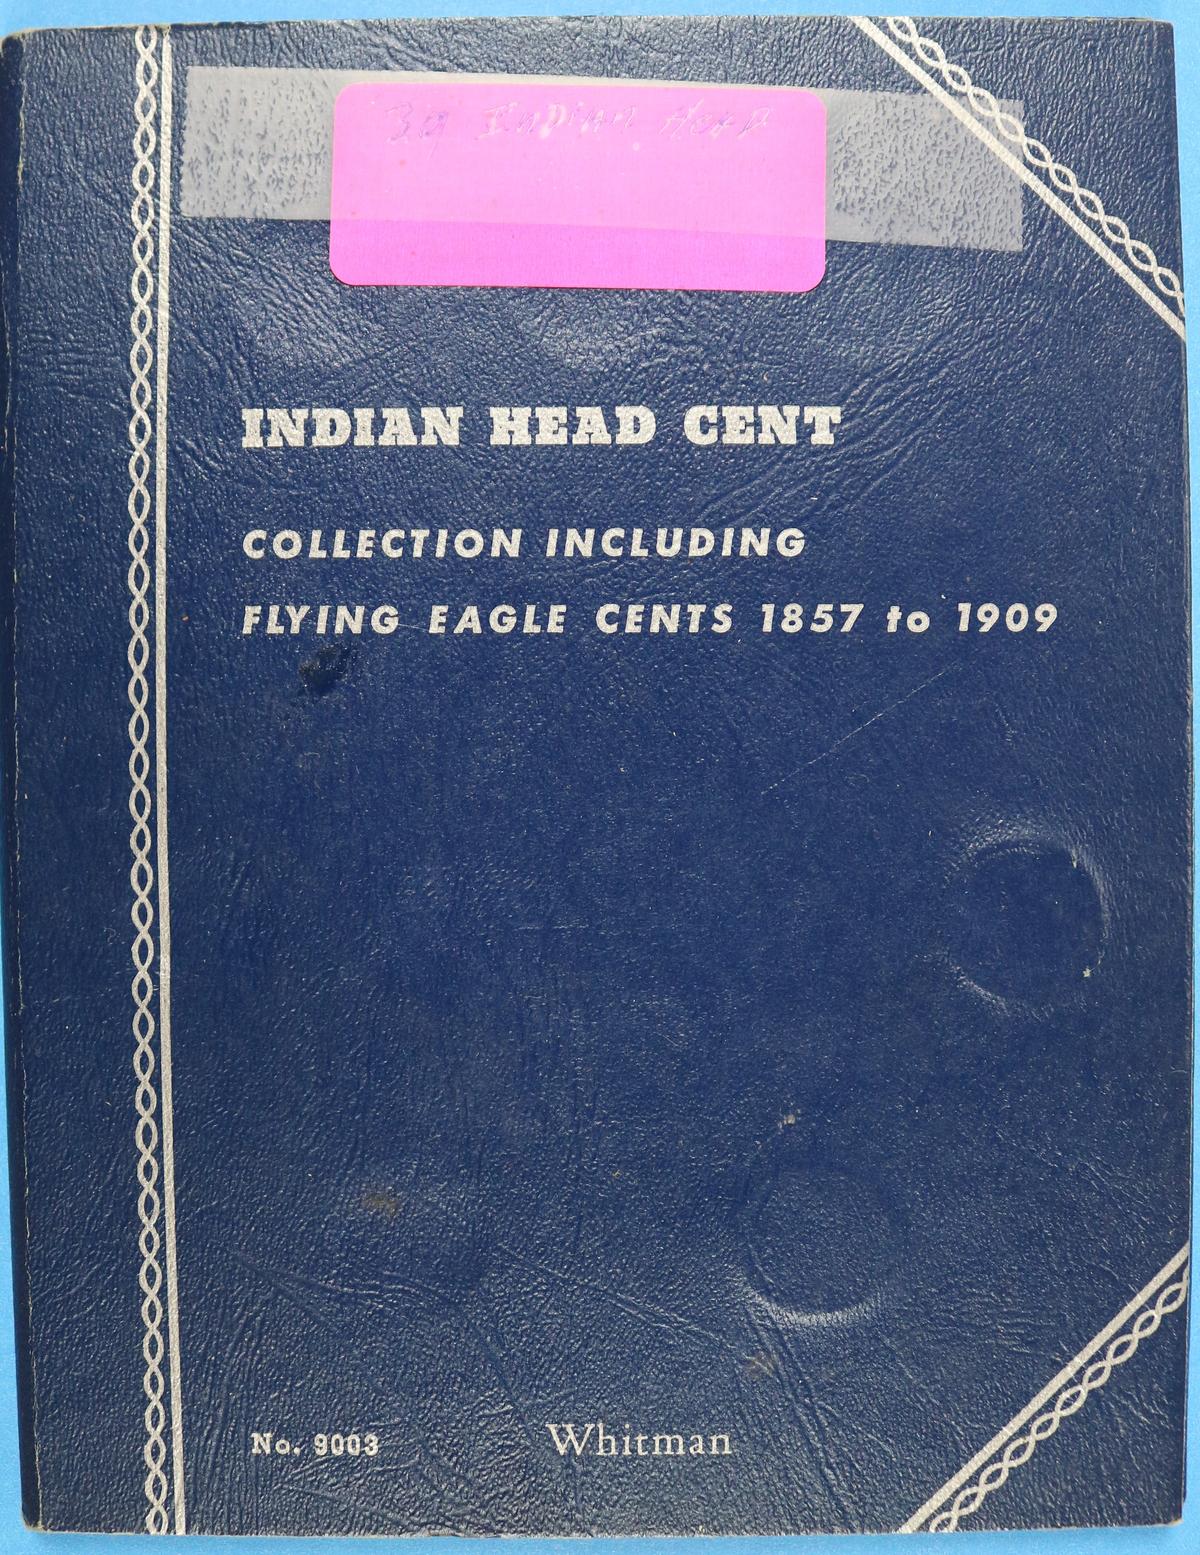 Book of 29 Indian Head Cent Pennies